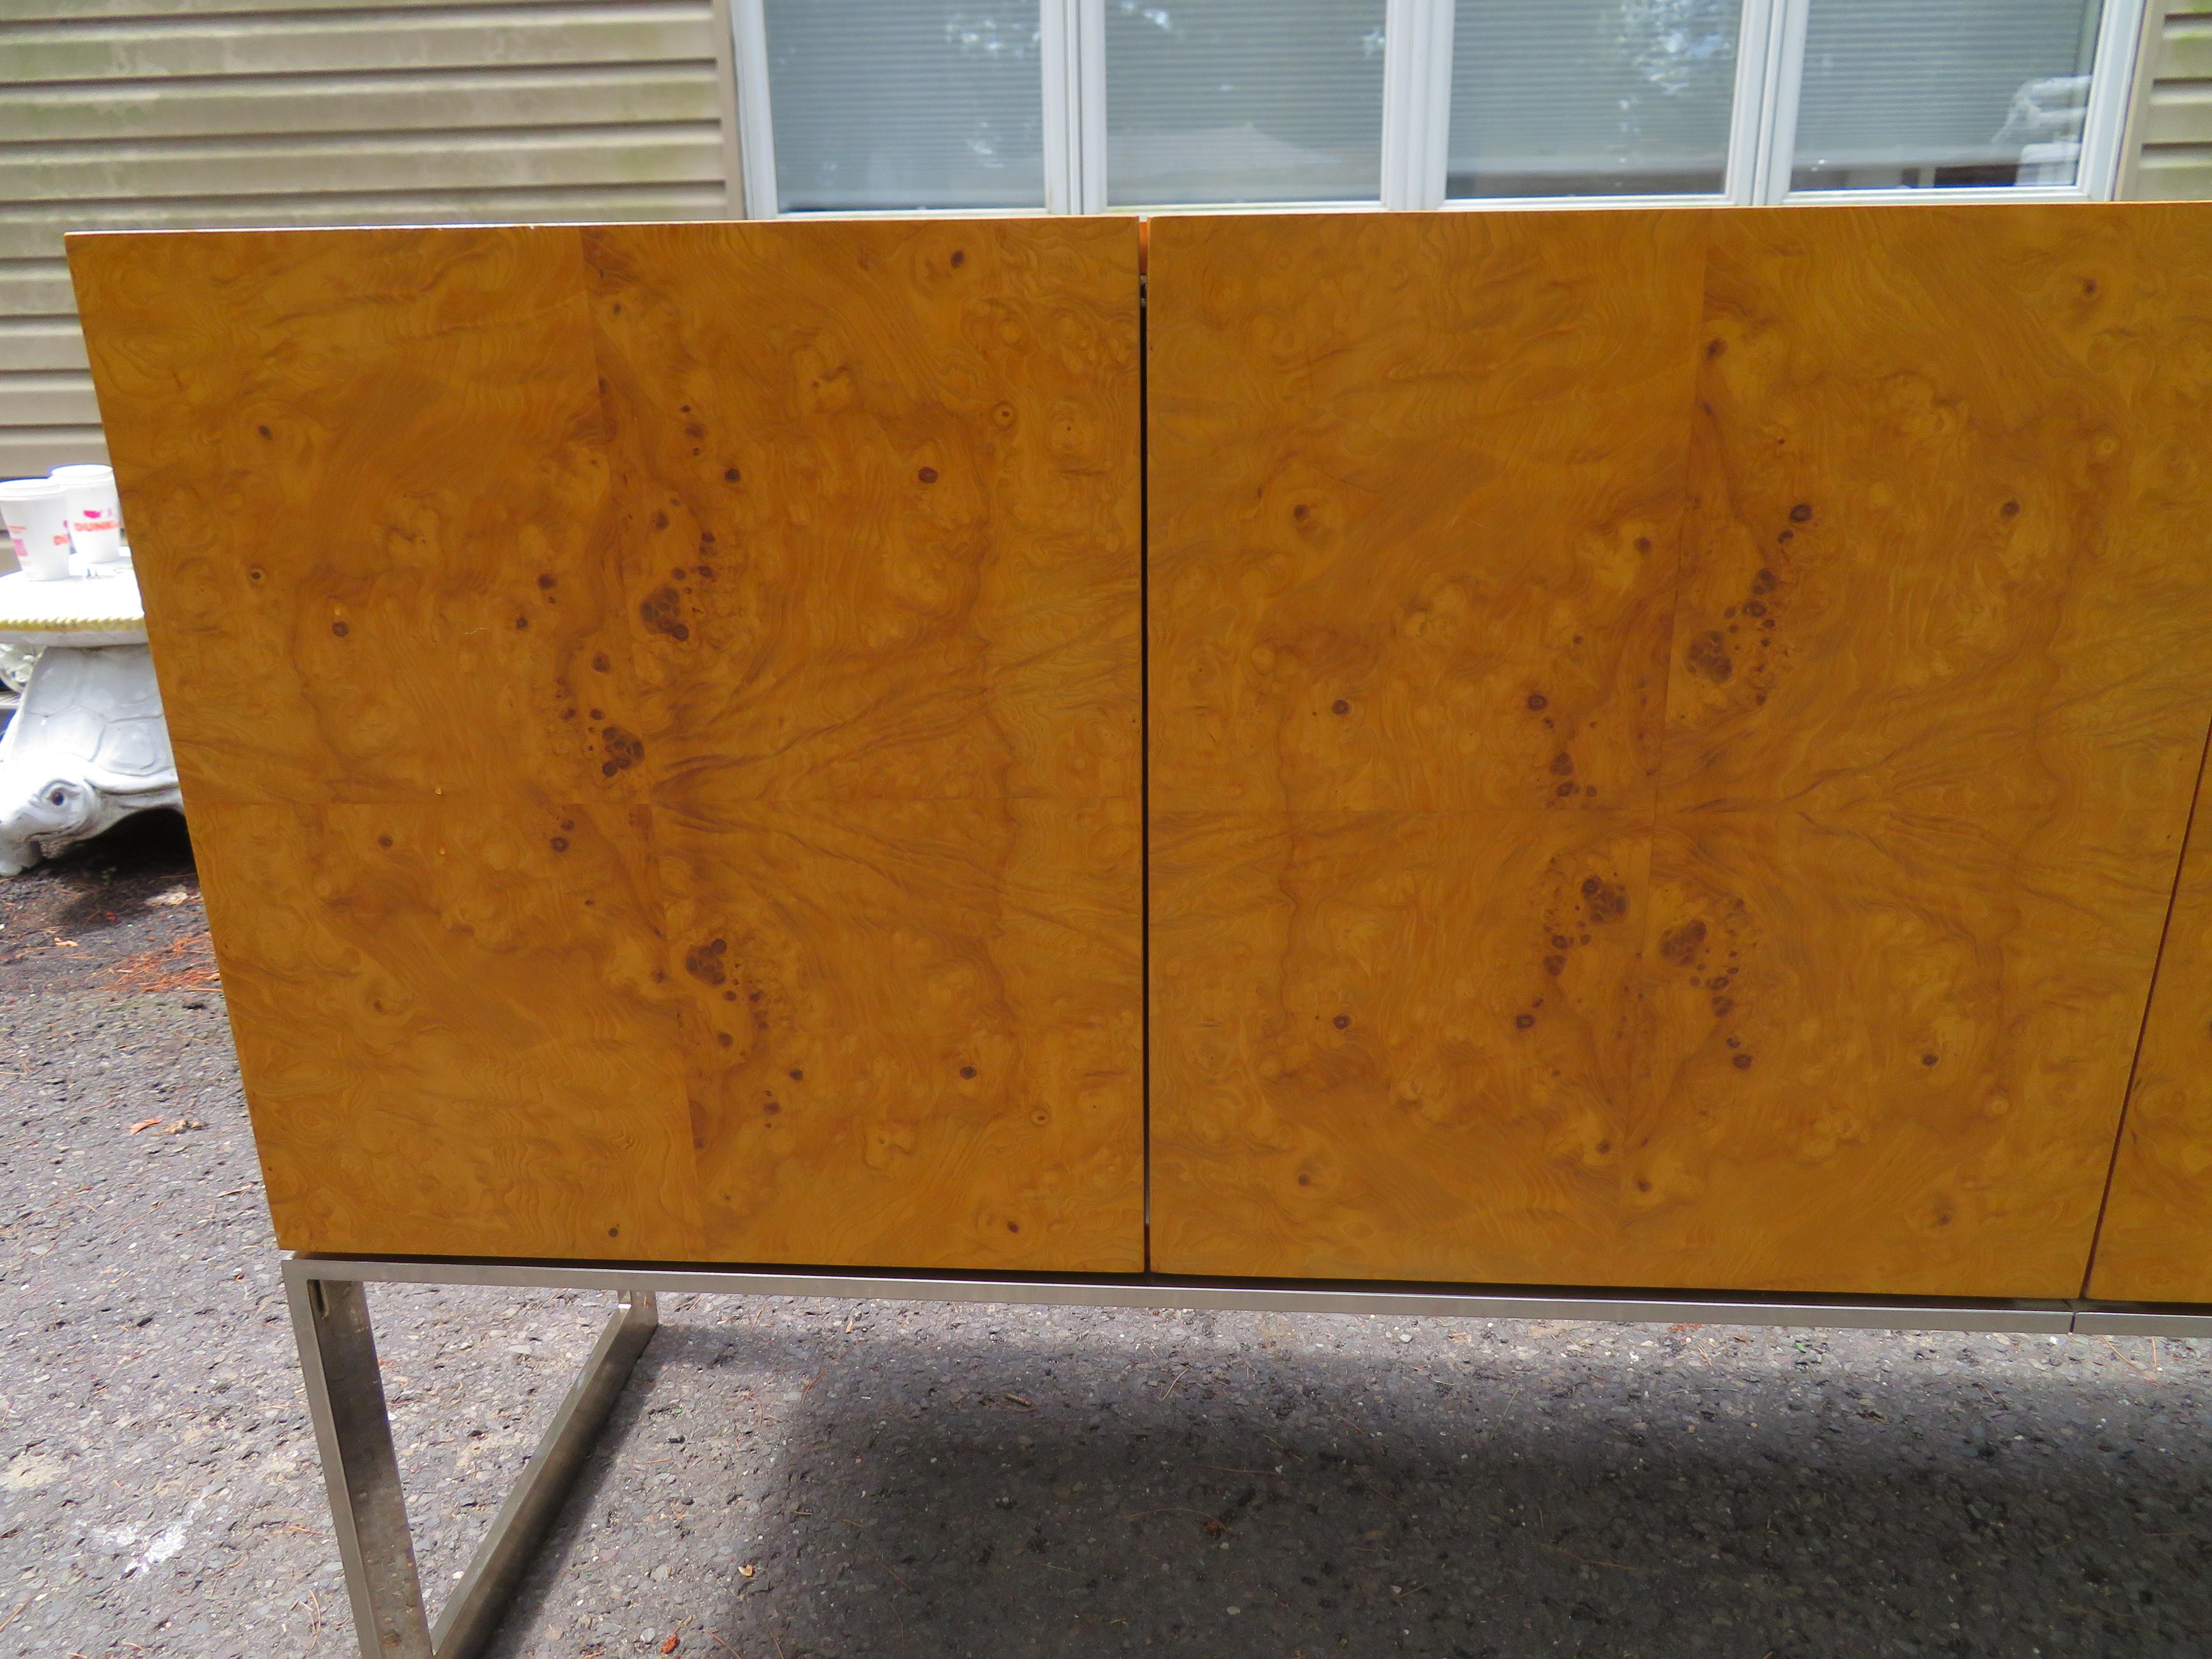 American Magnificent Milo Baughman Burled Olive Wood Chrome Credenza Mid-Century Modern